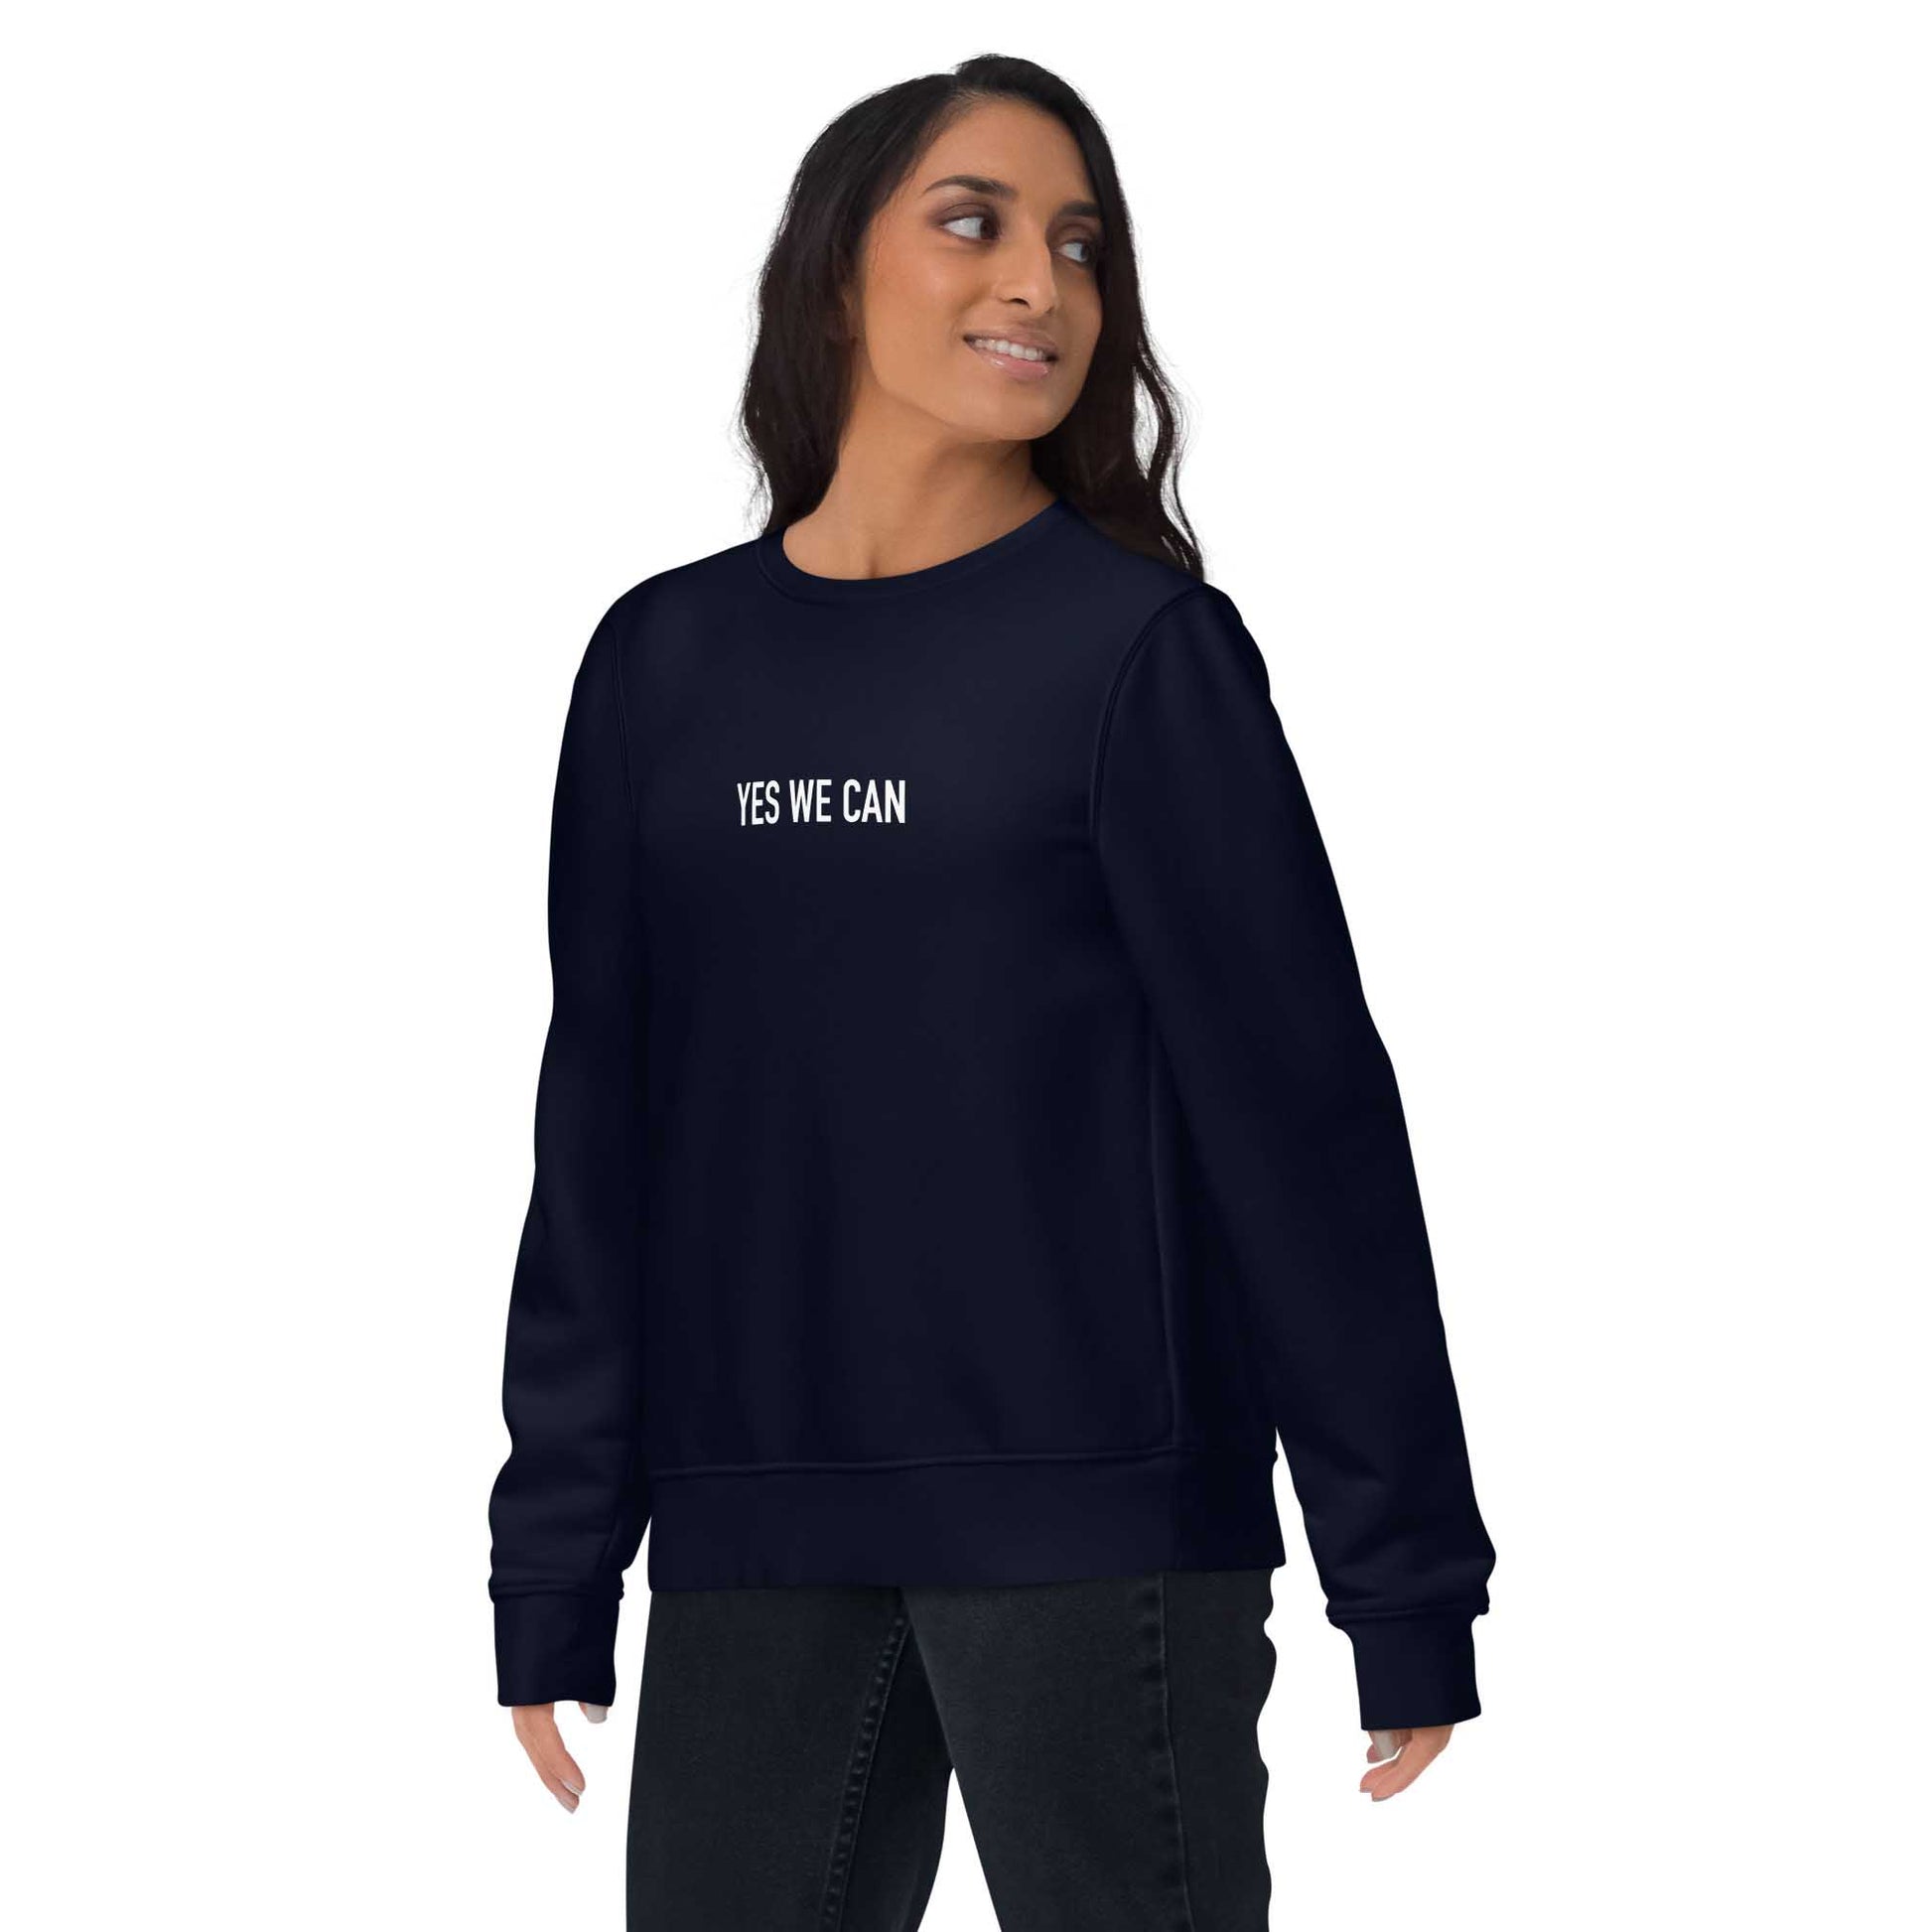 Women navy sustainable sweatshirt with Barack Obama's inspirational quote, "Yes We Can." 